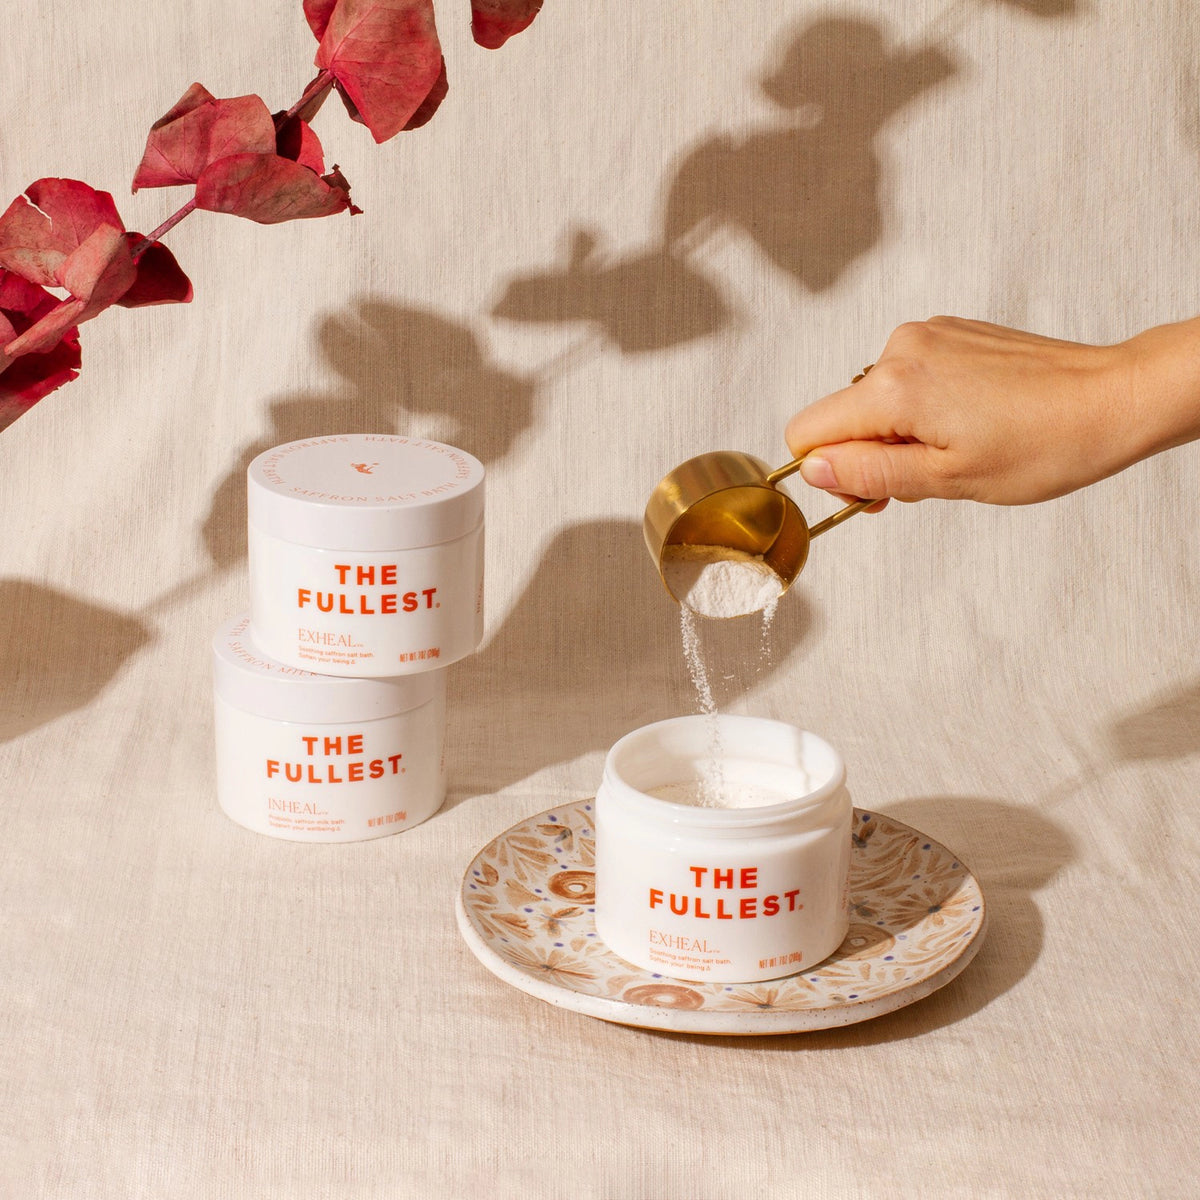 A person&#39;s hand pouring Exheal powder from a brass scoop into a jar labeled &quot;THE FULLEST&quot; on a plate, with two additional jars beside it and shadows of leaves in the background.